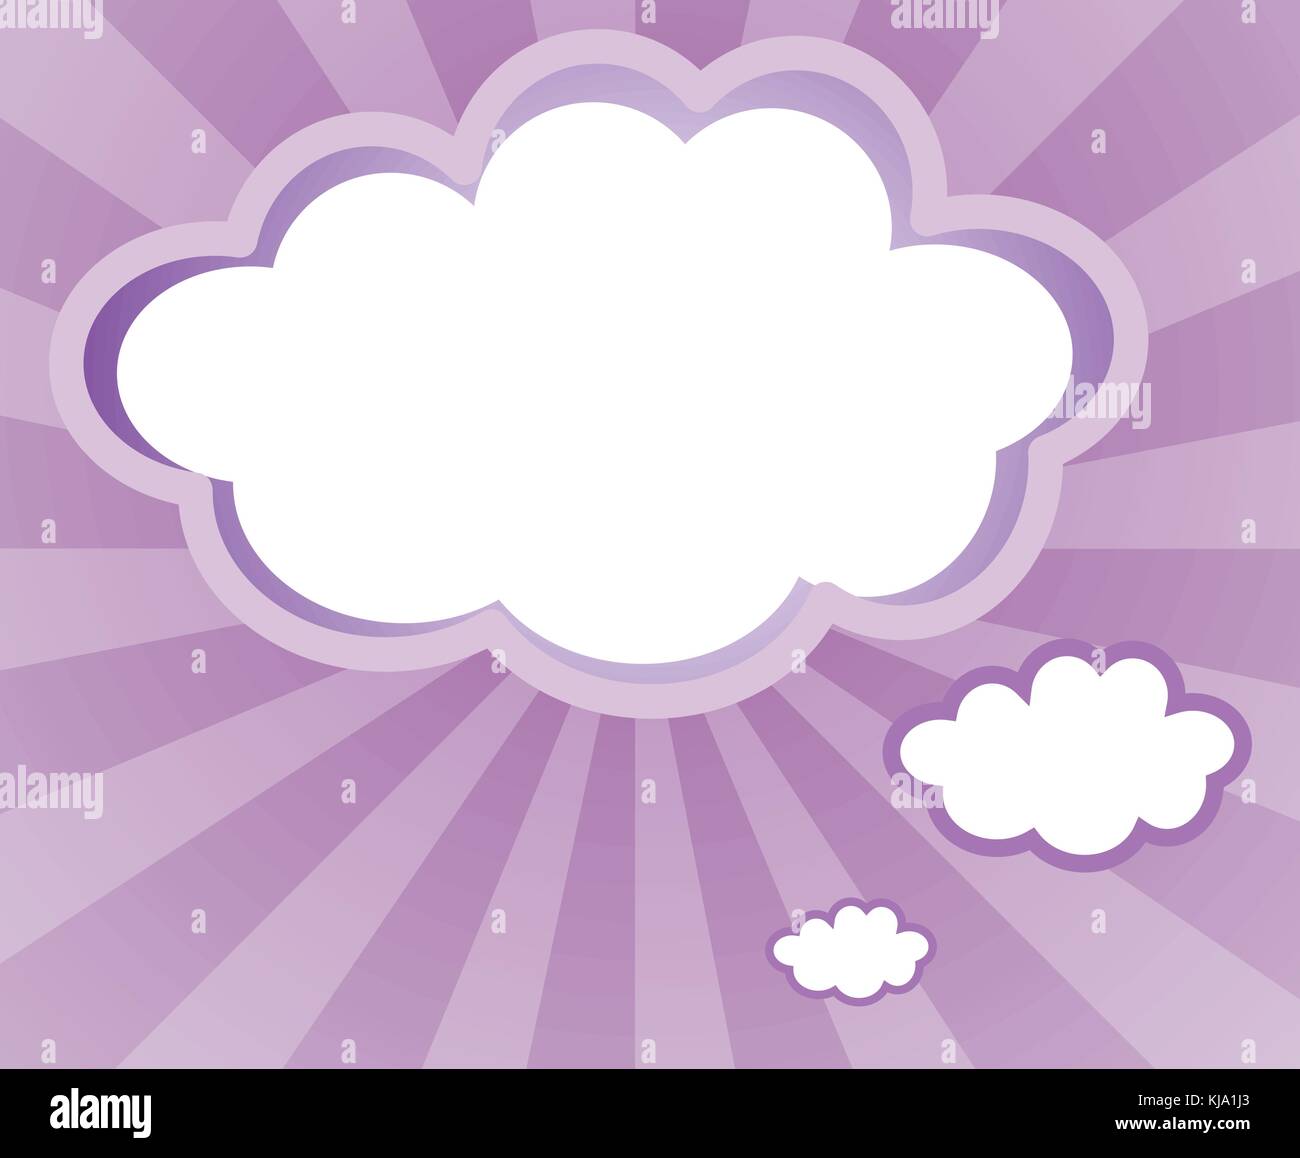 Illustration of an empty space in a cloud form Stock Vector